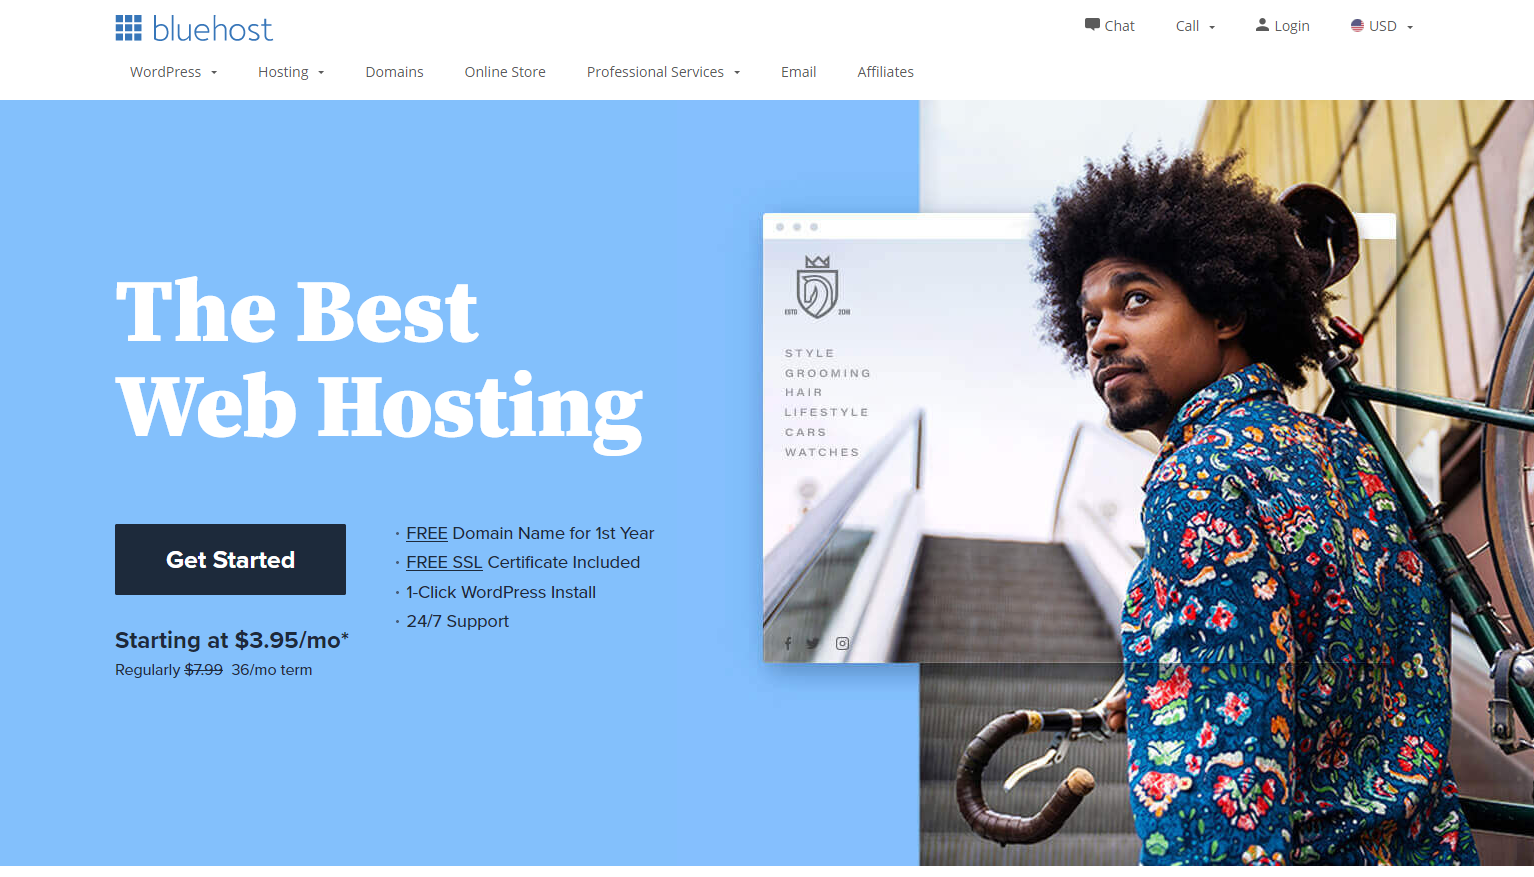 BlueHost is considered one of highest-rated hosting companies in the world, and specializes in WordPress Hosting